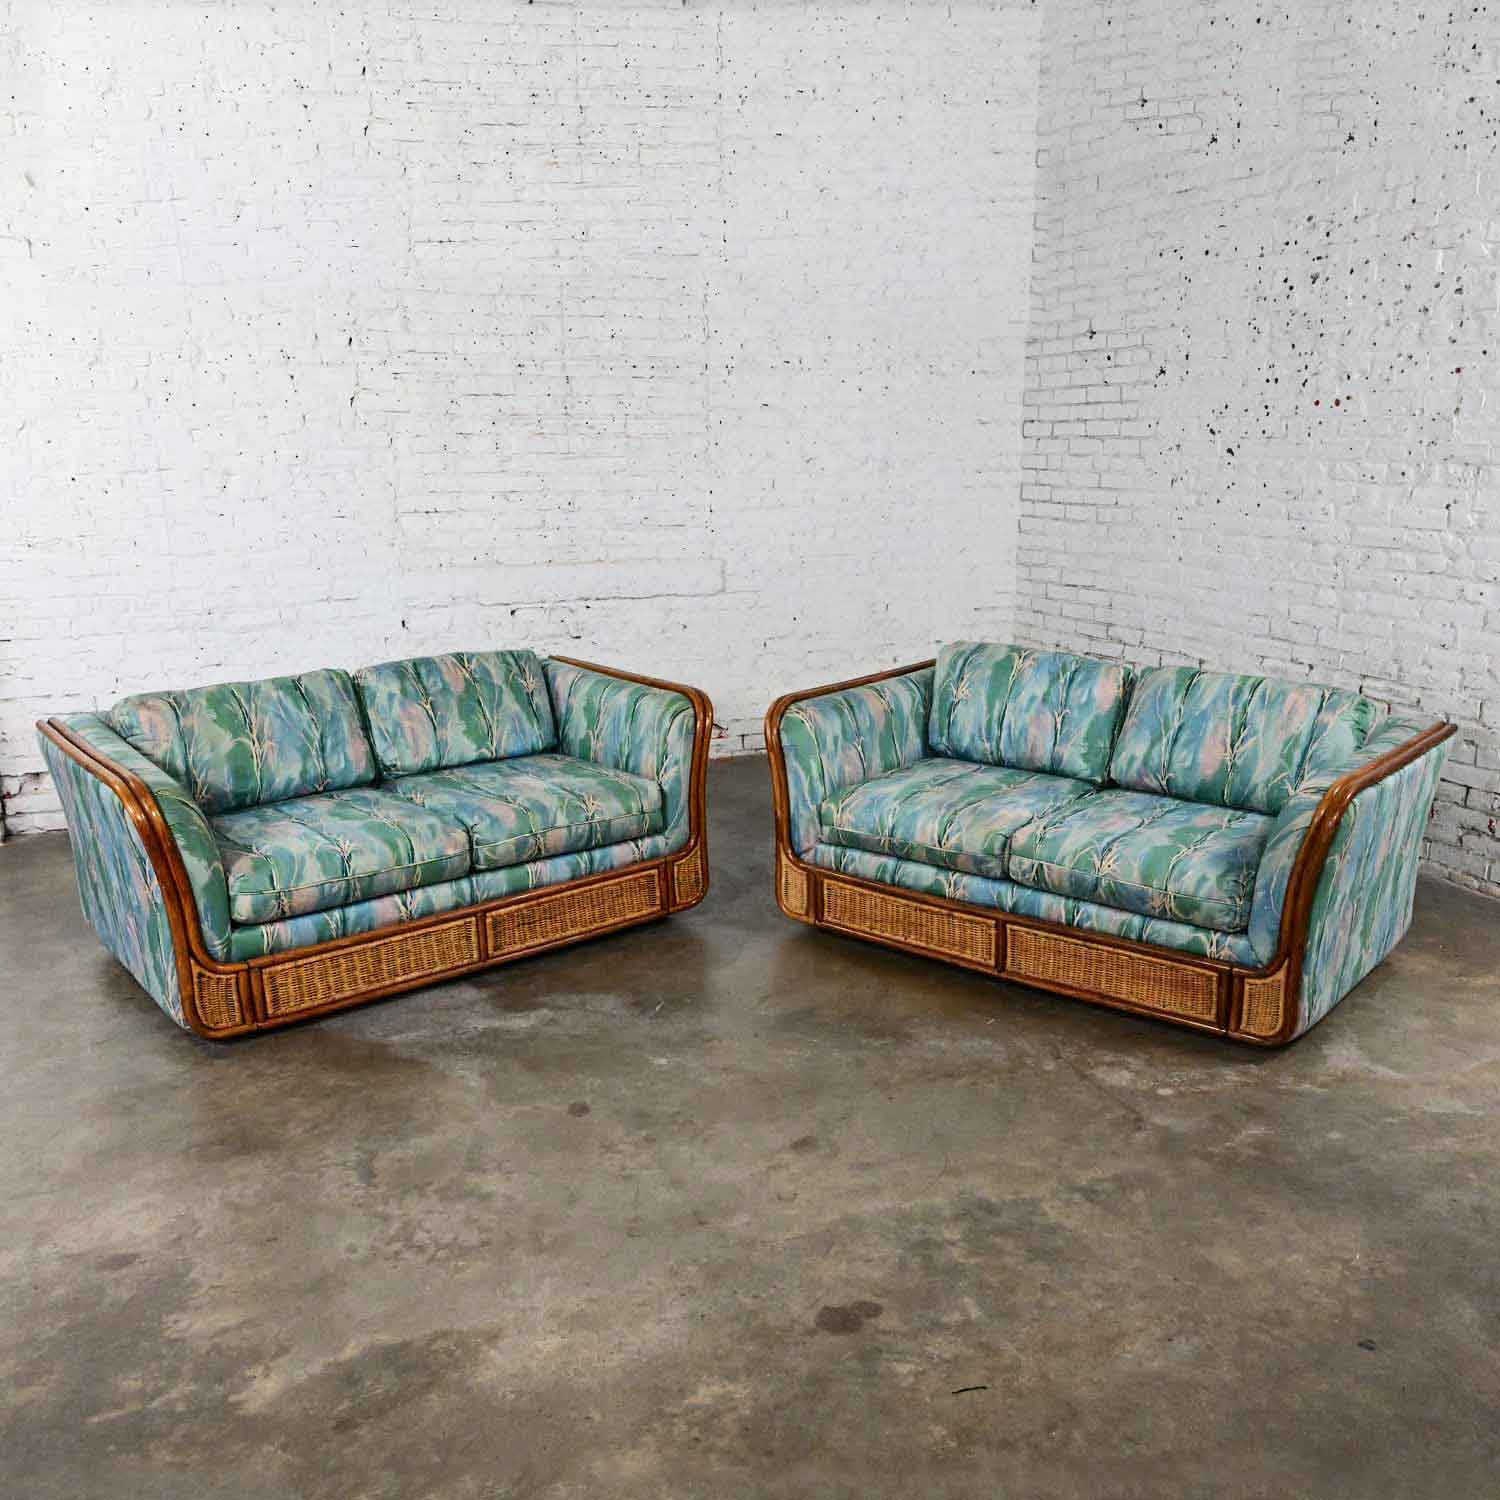 Splendid vintage Boho Chic rattan and wicker tuxedo style upholstered loveseat sofas, a pair. Comprised of rattan & wicker frames and both loveseats wear a beautiful contemporary fabric with colors of blue, green, pink, & white. Beautiful condition,